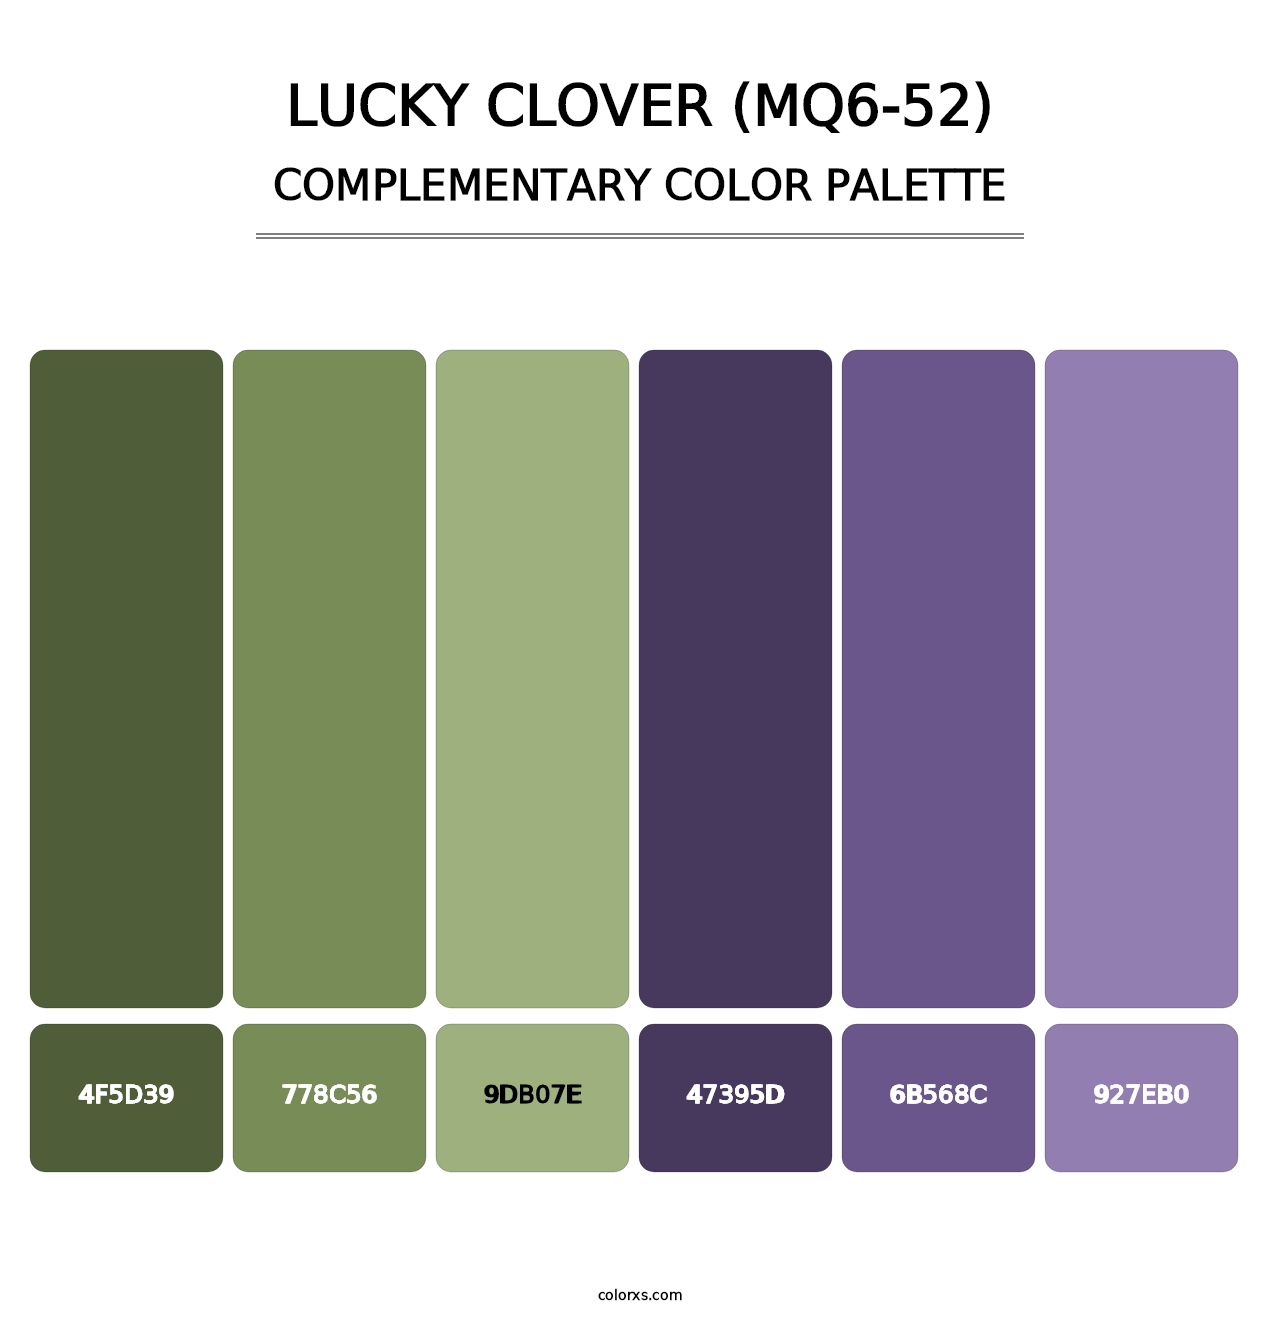 Lucky Clover (MQ6-52) - Complementary Color Palette